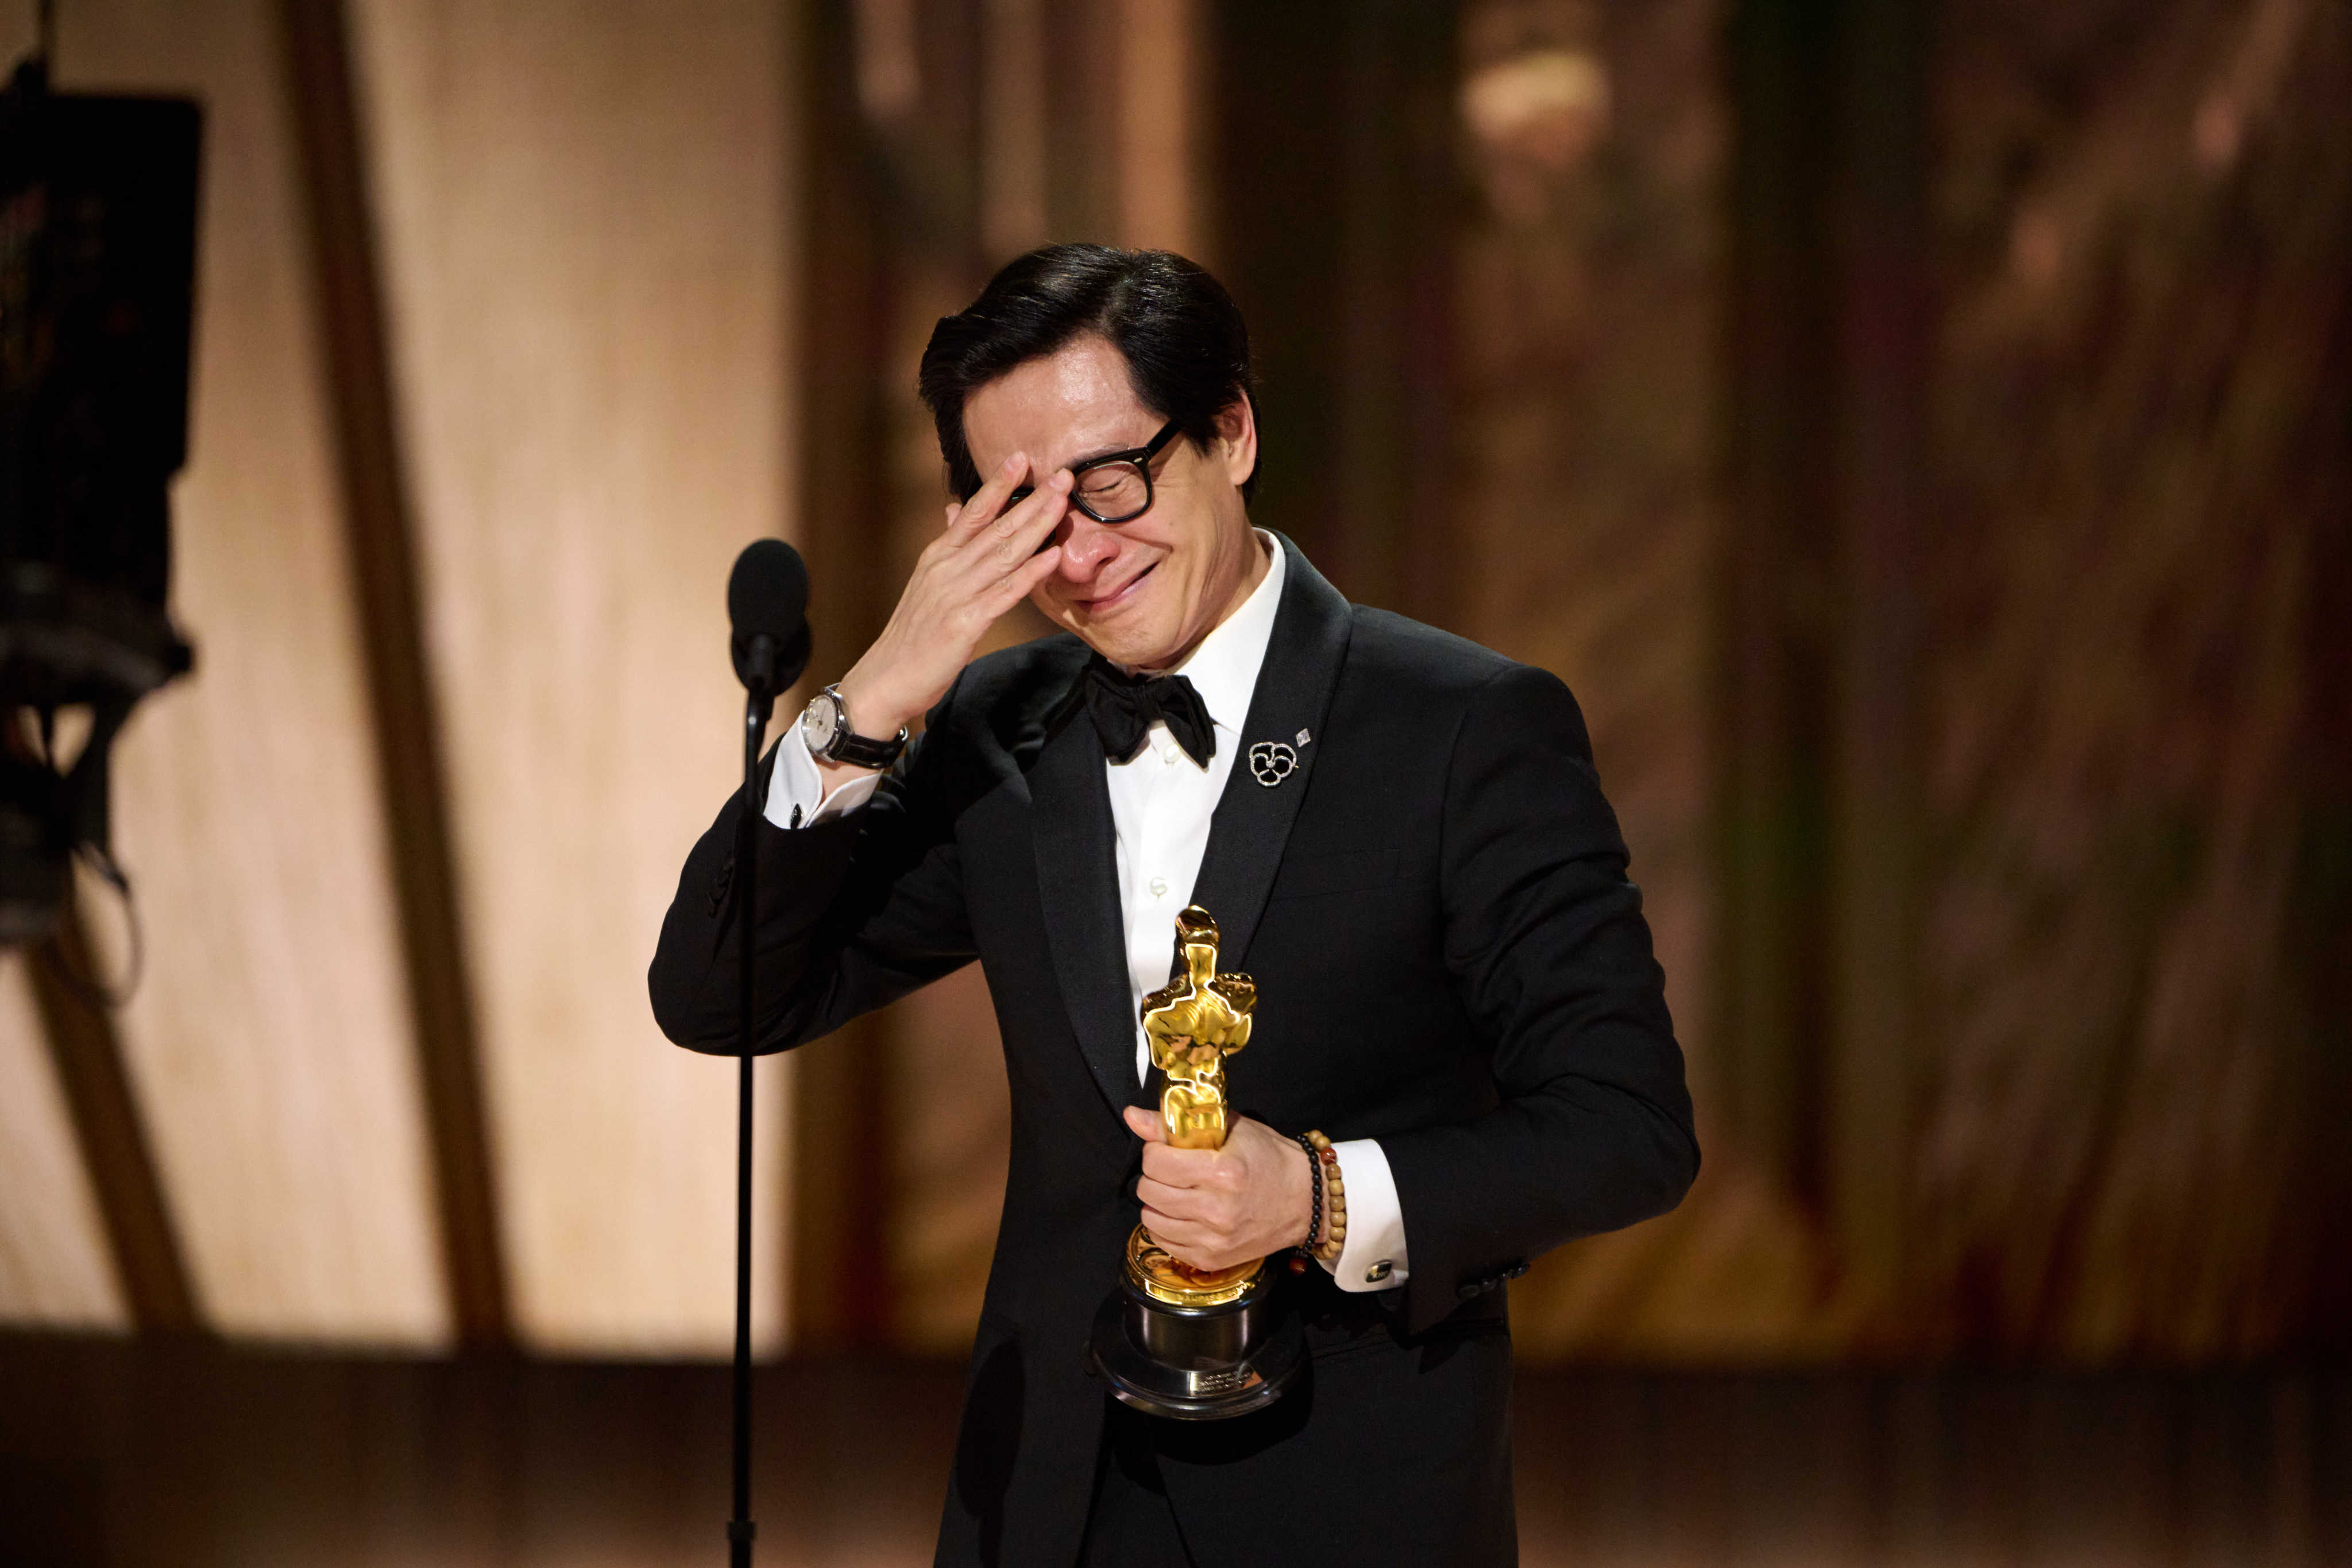 Ke Huy Quan accepts the award for best performance by an actor in a supporting role for “Everything Everywhere All at Once” at the 95th Academy Awards. Photo: dpa